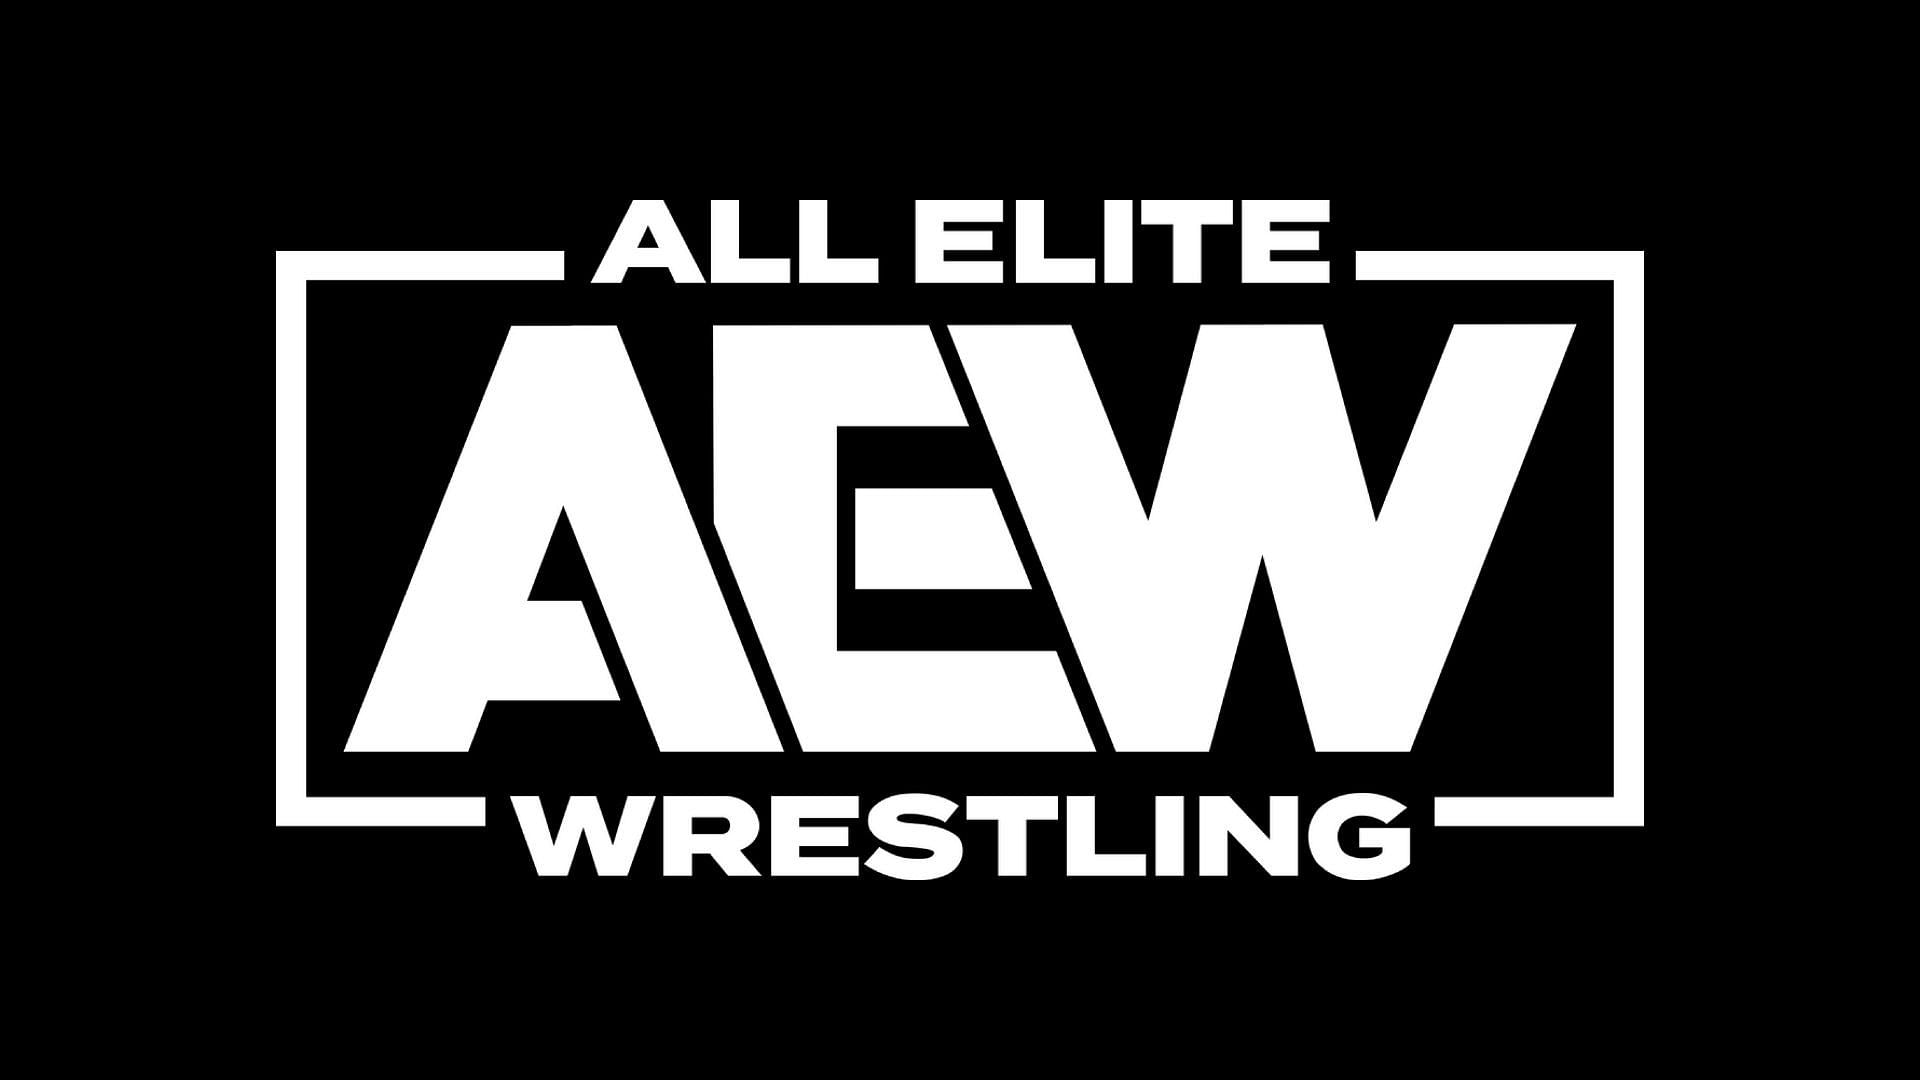 Will this star return to AEW before 2023 ends?